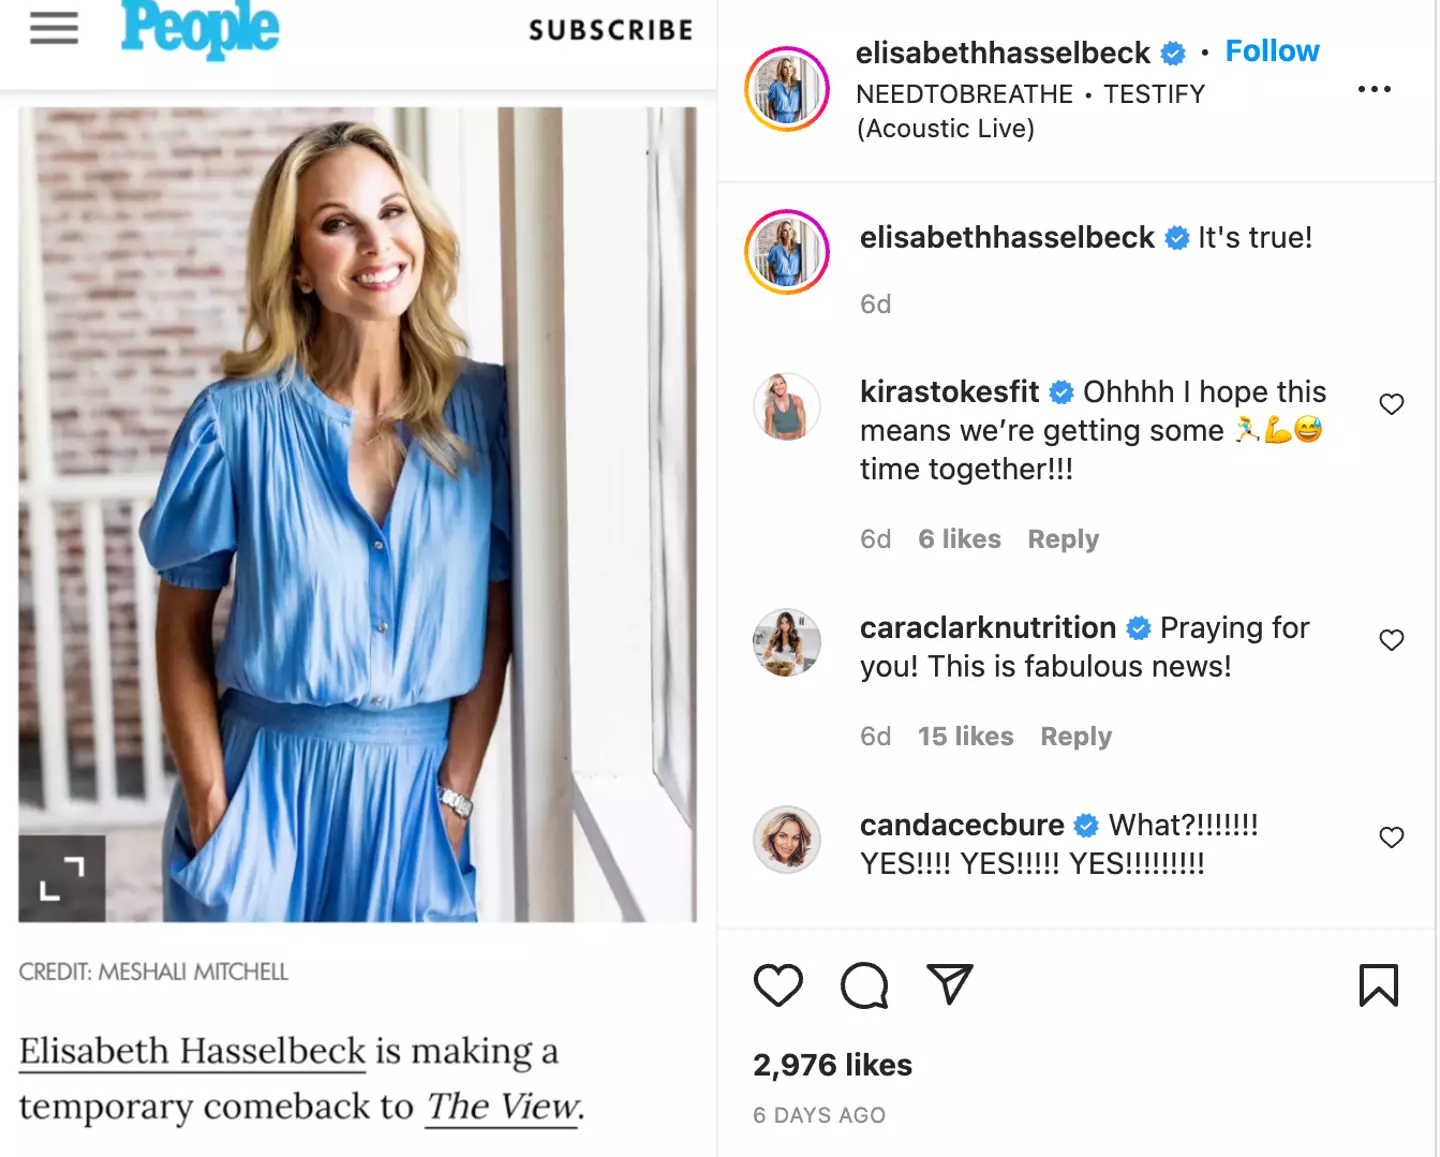 Elisabeth Hasselbeck is making a return to The View.